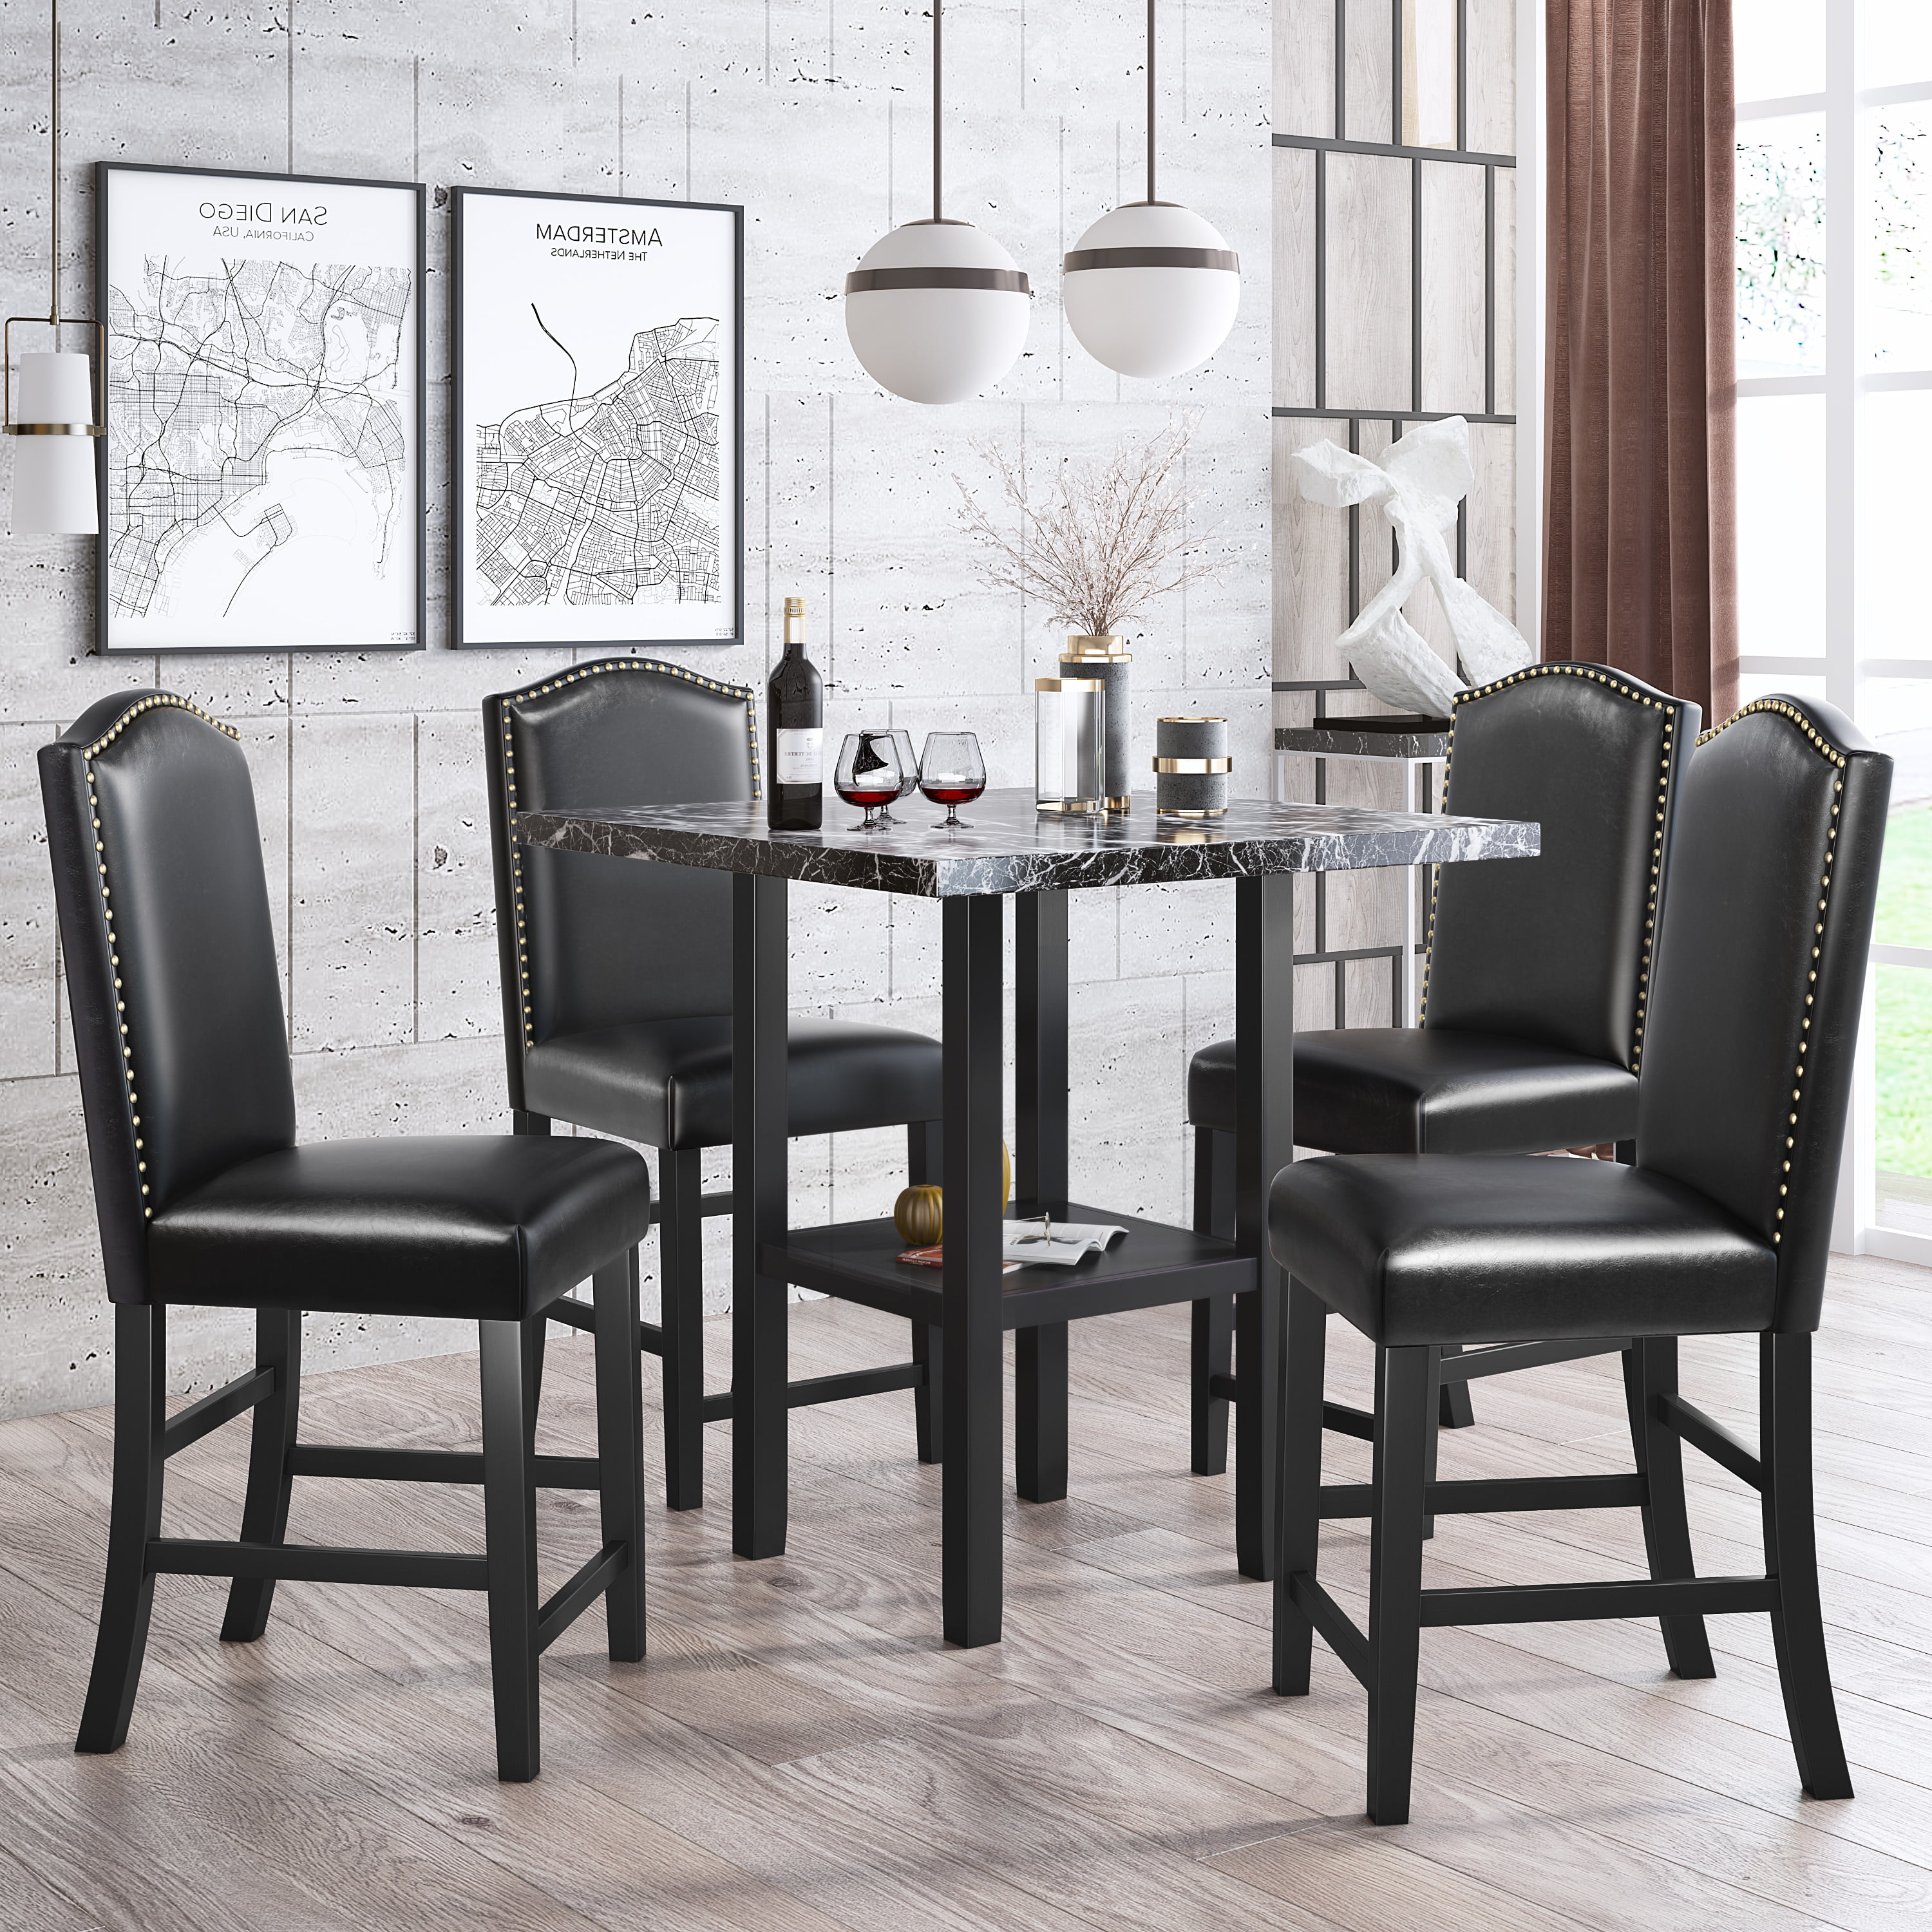 5 Piece Dining Table And Chair Set, Light Grey Wooden Dining Table And Chairs Set